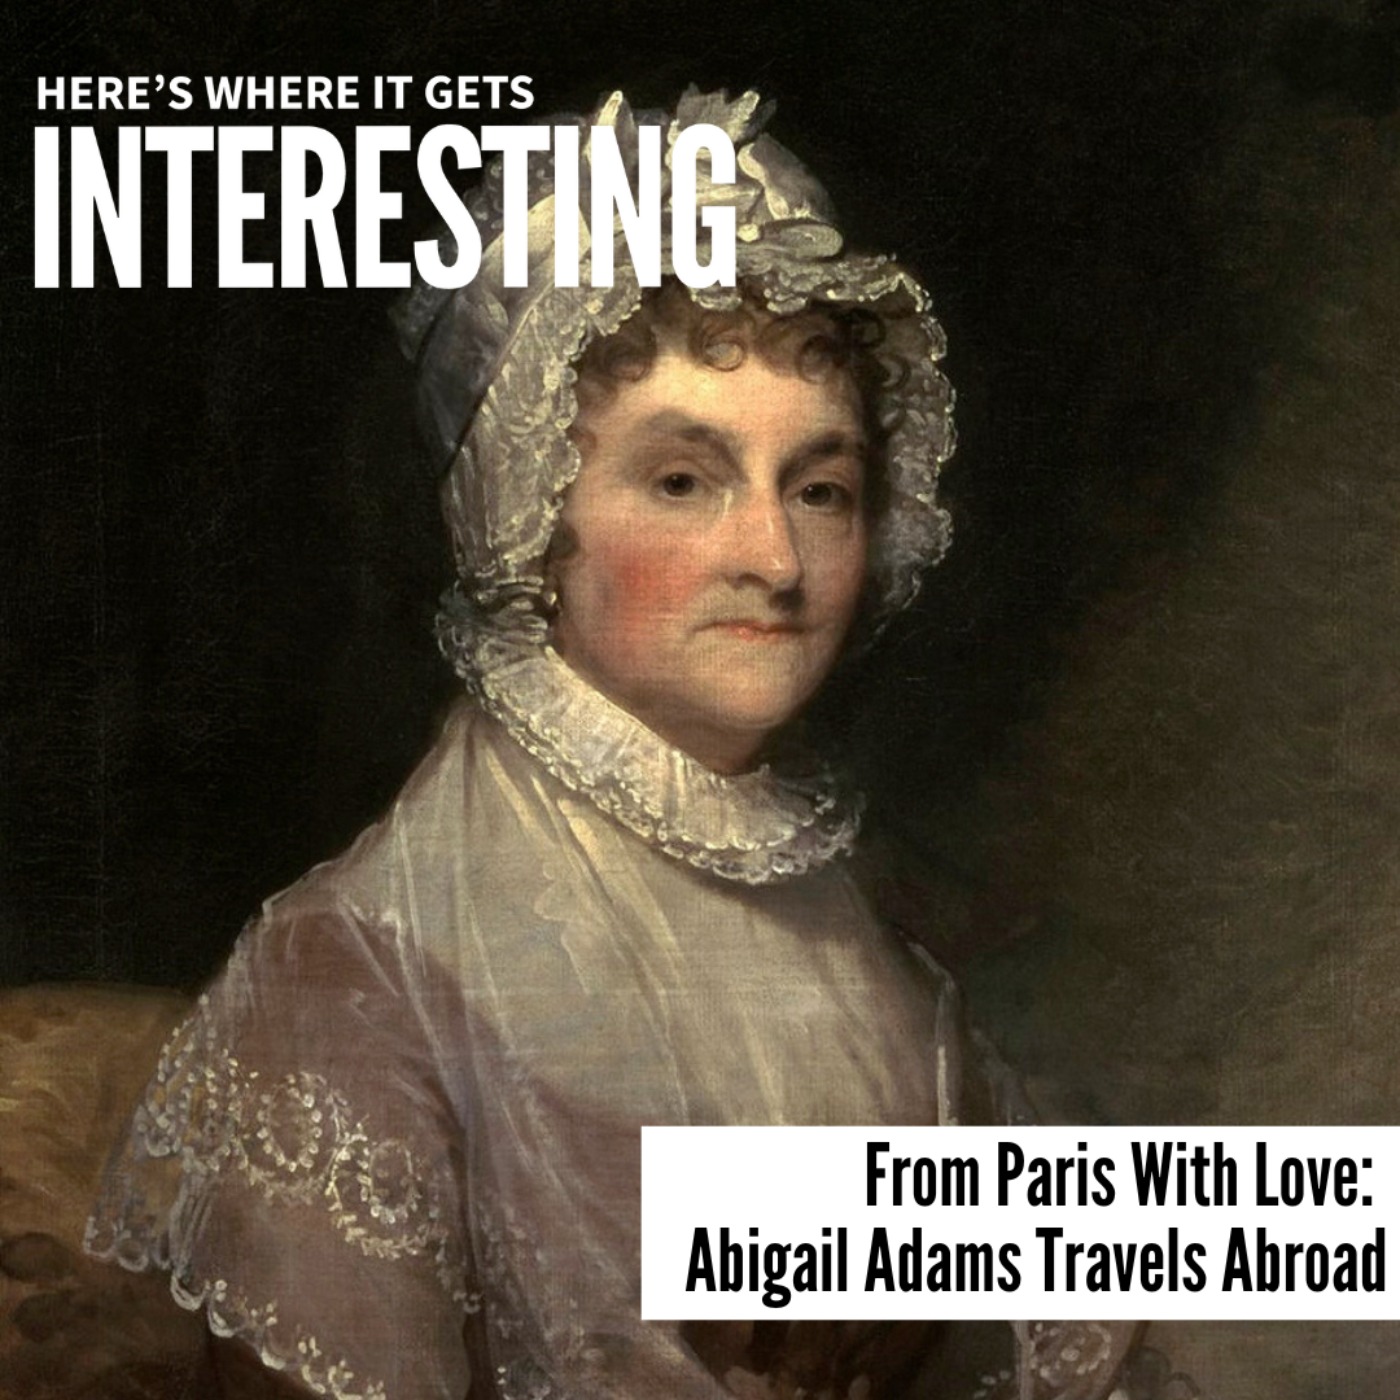 From Paris With Love: Abigail Adams Travels Abroad